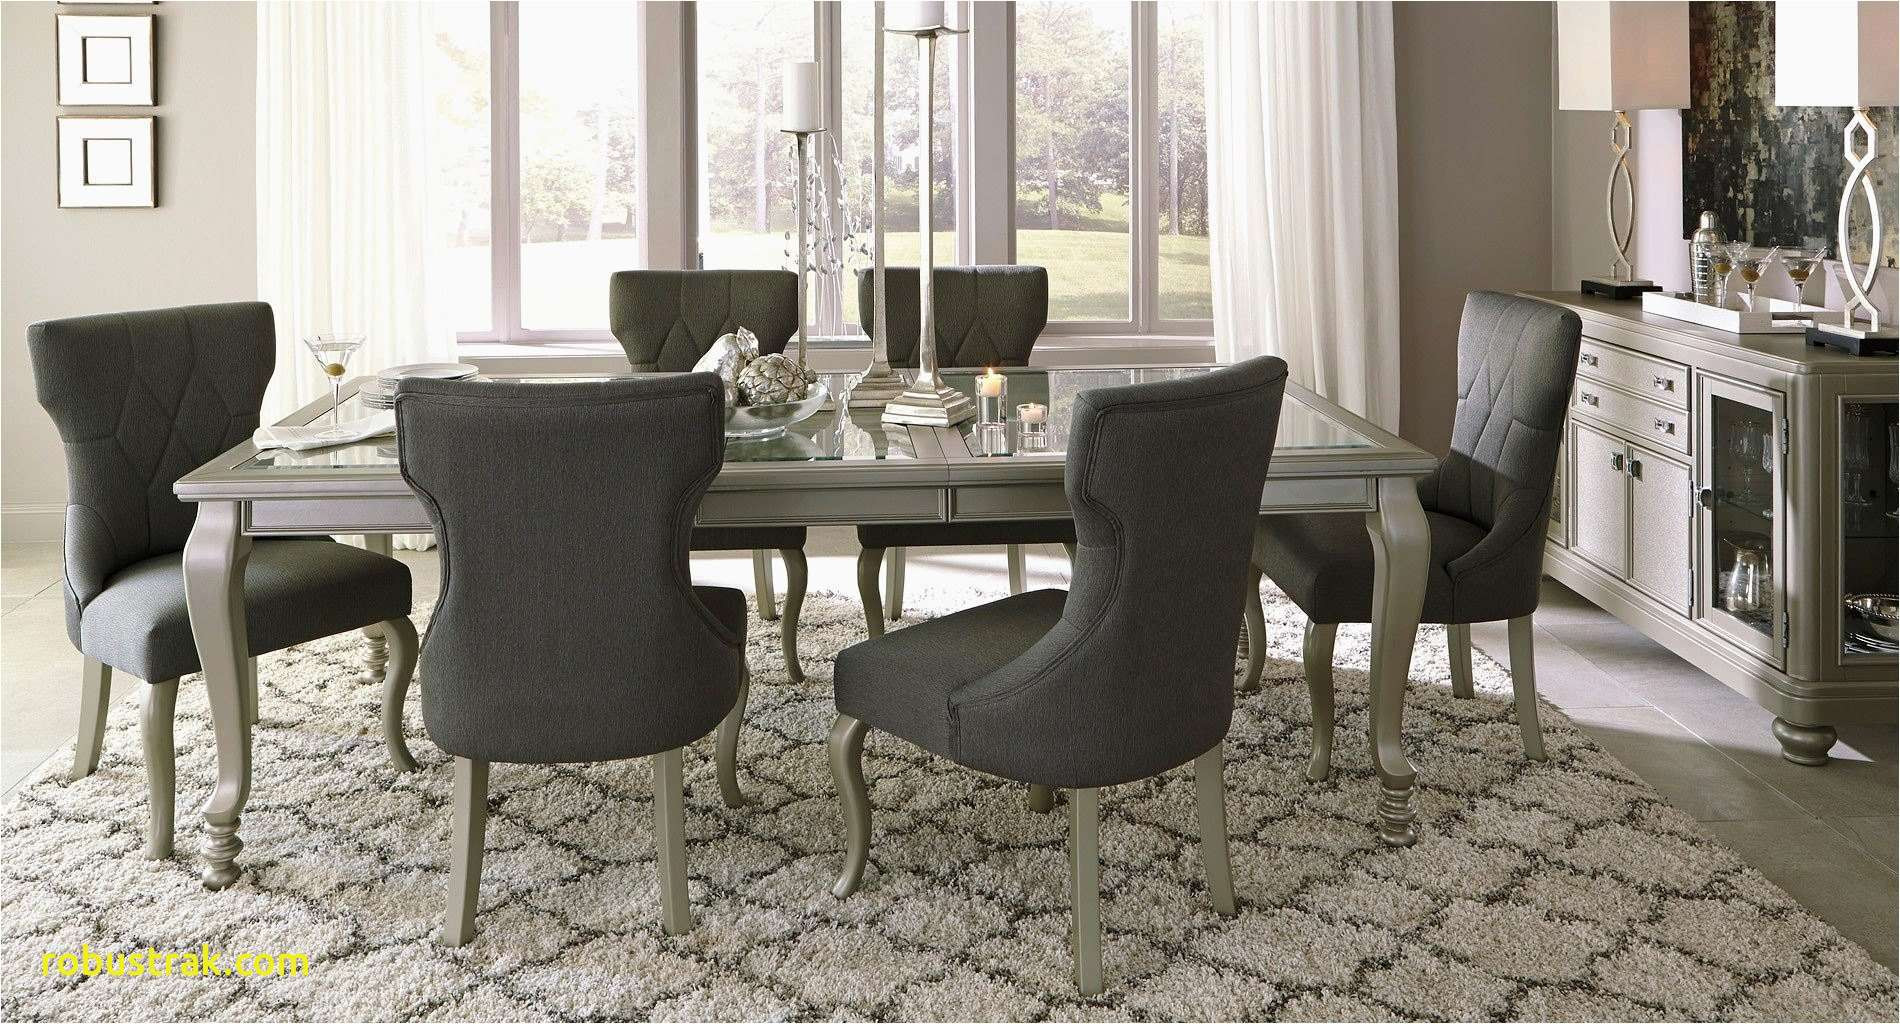 26 Perfect Living Room Rug On Hardwood Floor 2024 free download living room rug on hardwood floor of lovely dining table decor home design ideas in dining room designs stunning shaker chairs 0d archives modern design ideas painted dining table ideas